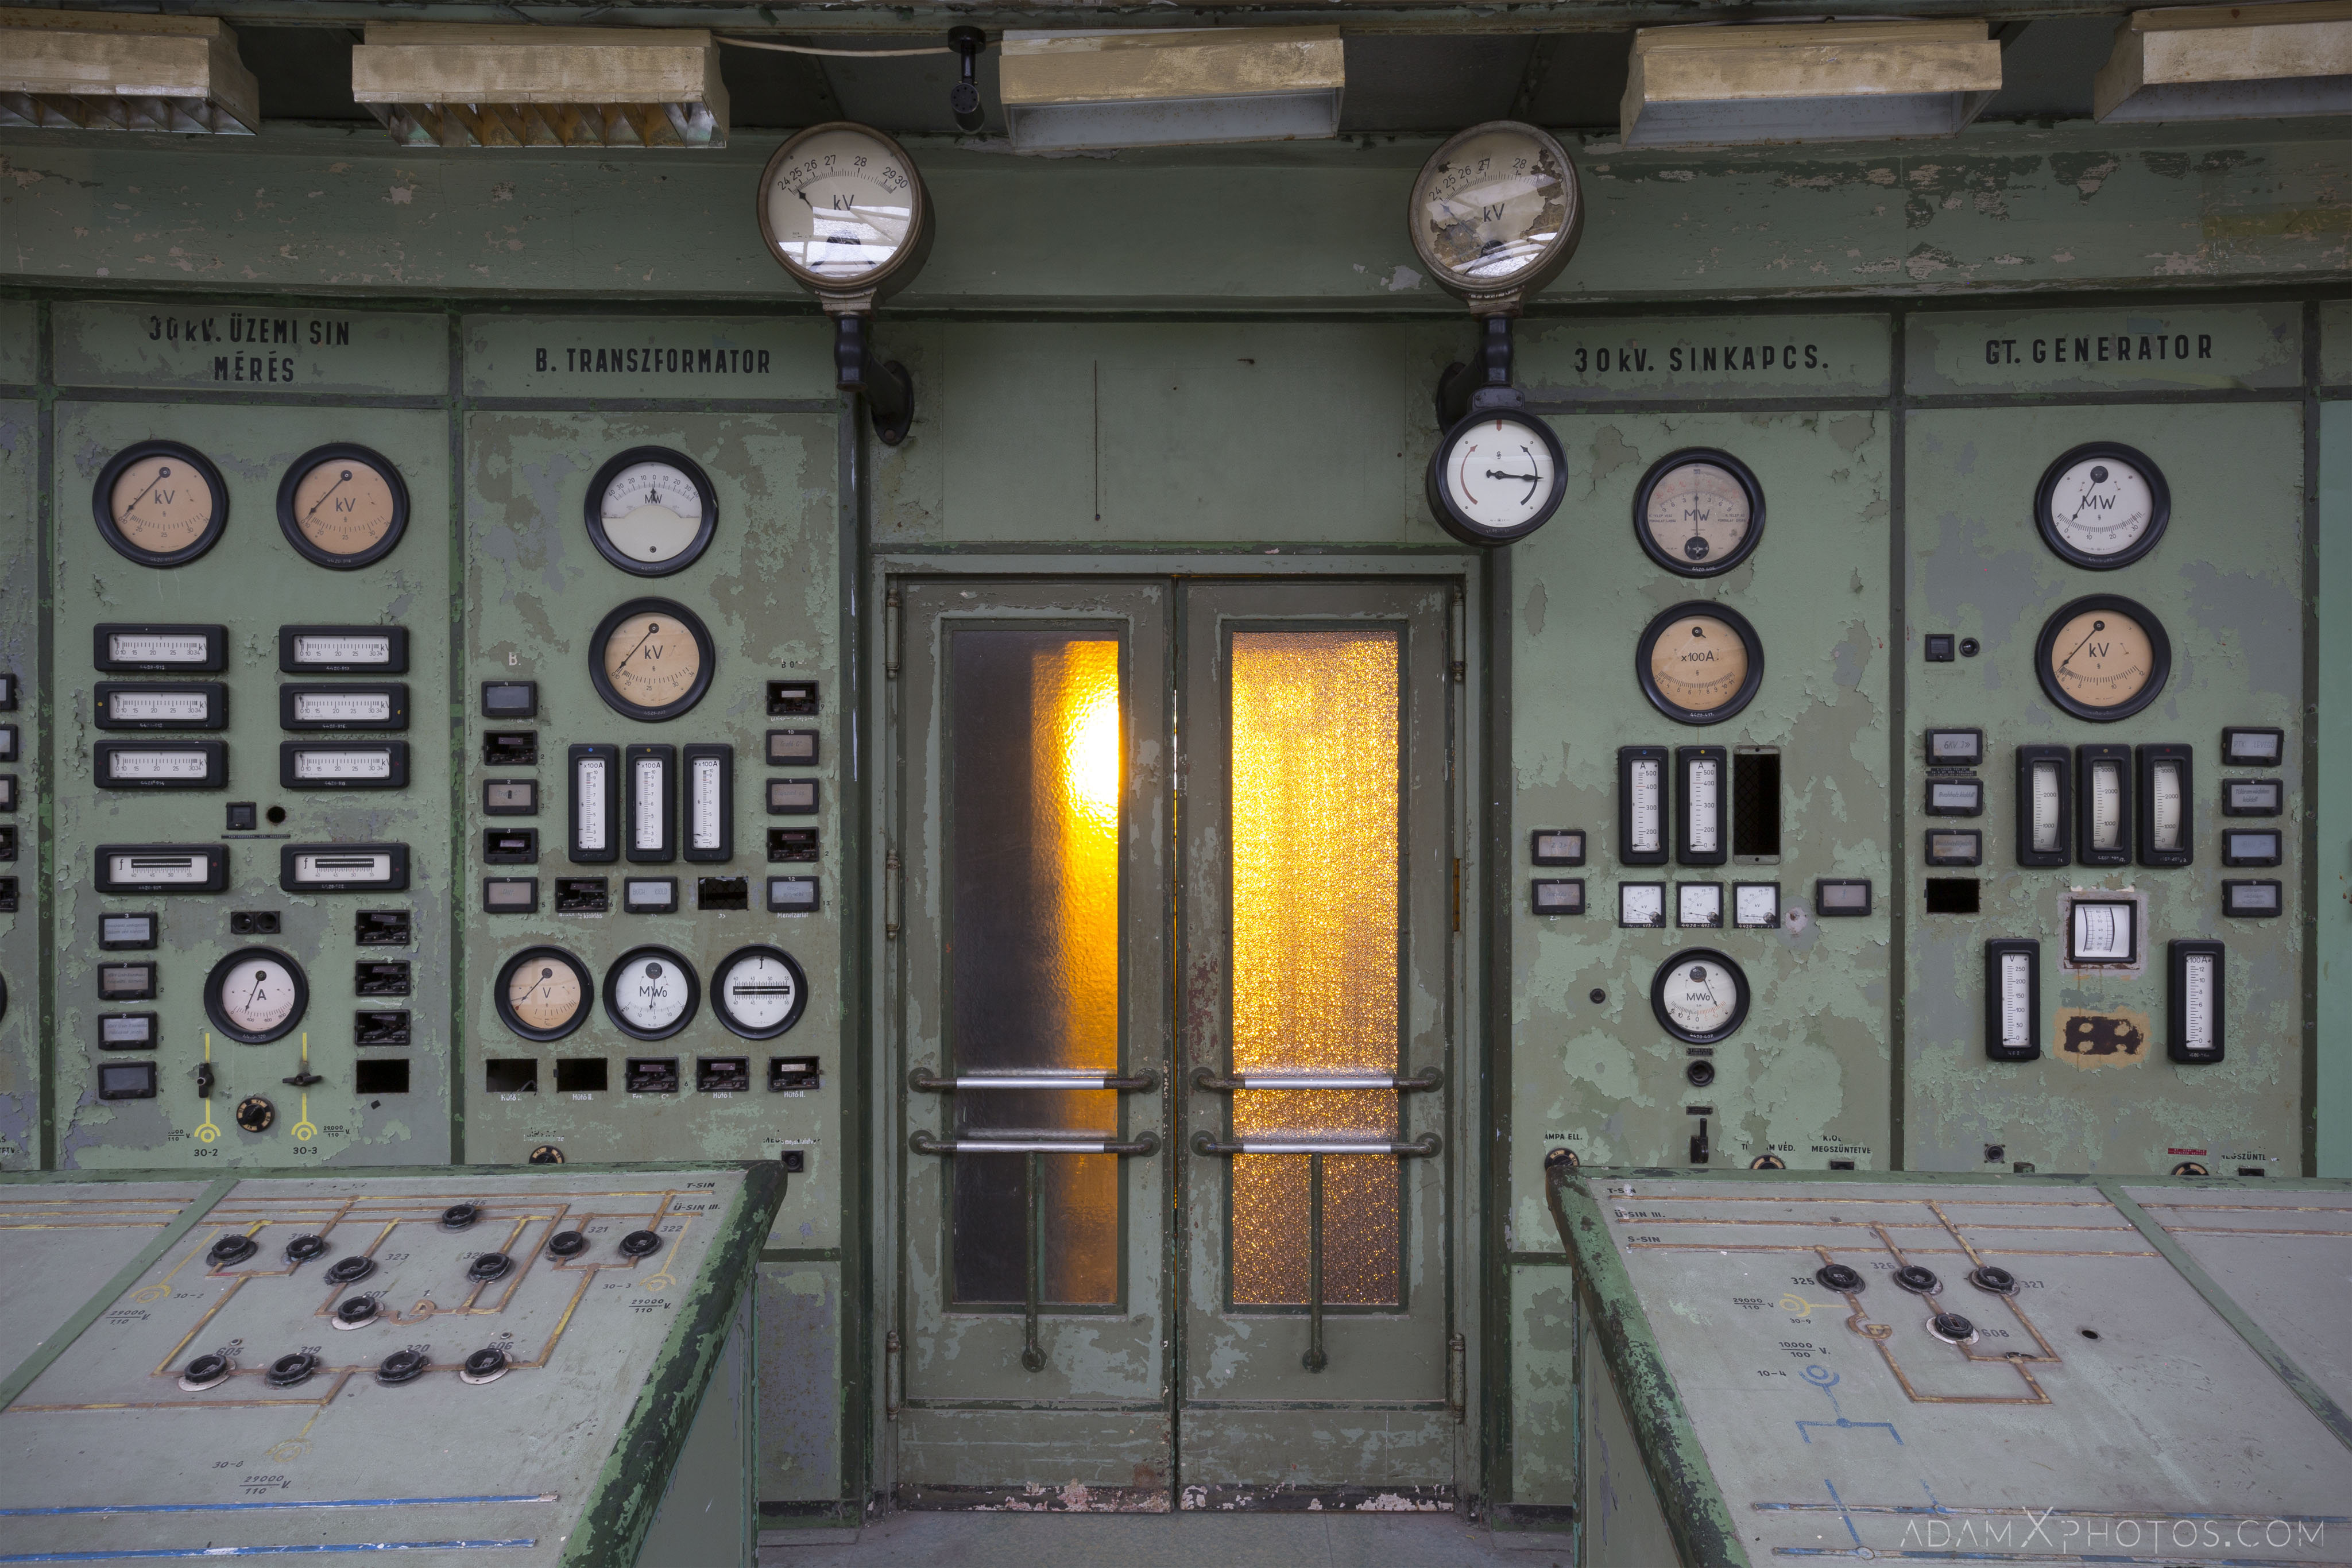 Door and panels details Kelenföld Control Room Art Deco Power Station Green controls panels switches udapest hungary Adam X Urbex Urban Exploration Access 2018 Abandoned decay ruins lost forgotten derelict location creepy haunting eerie